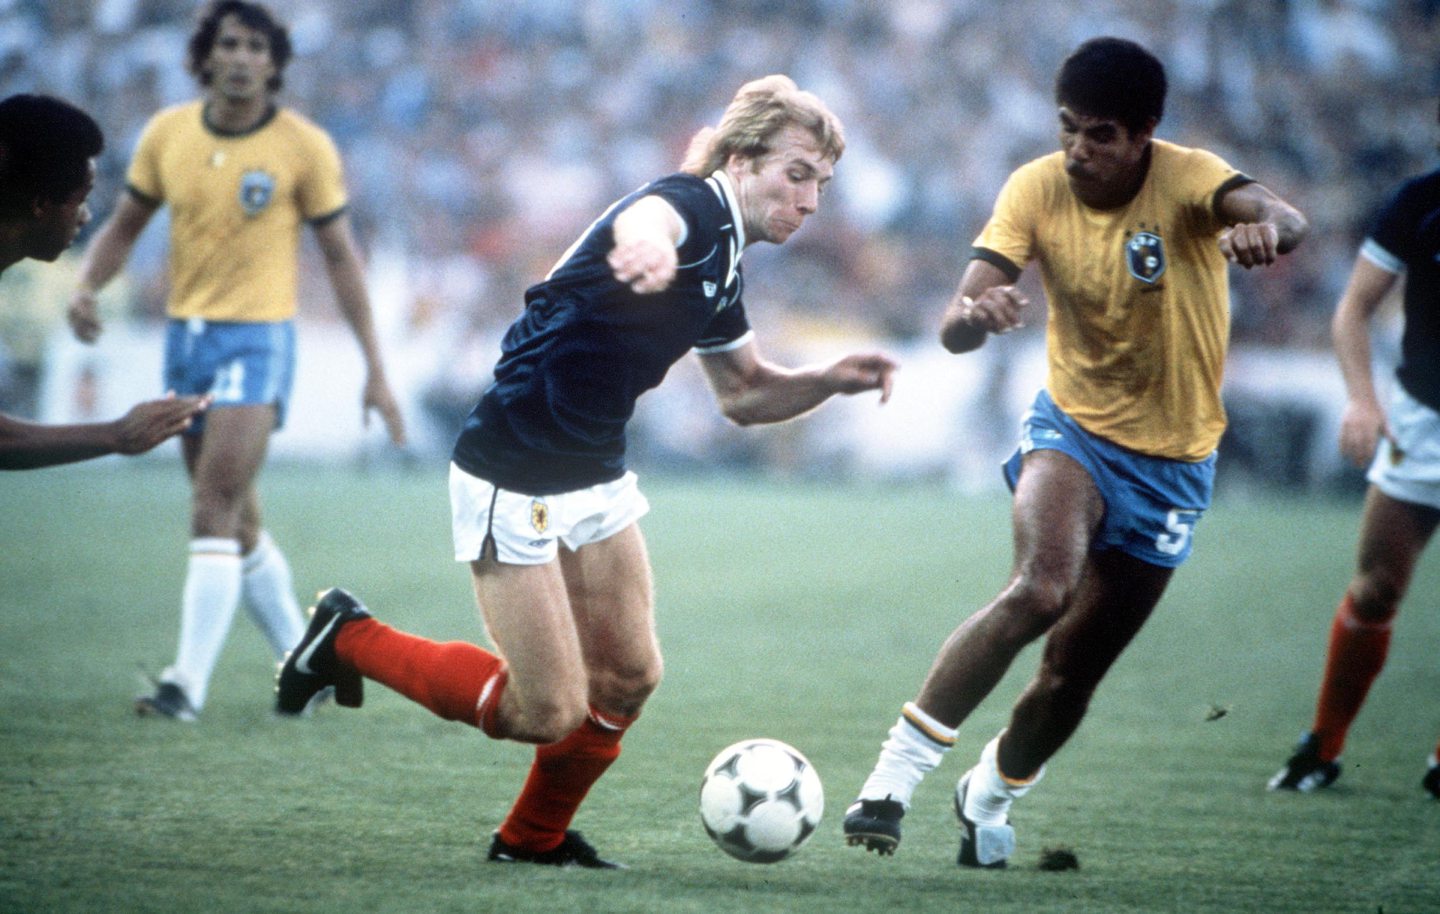 Steve Archibald in action on the football pitch against Brazil at the 1982 World Cup